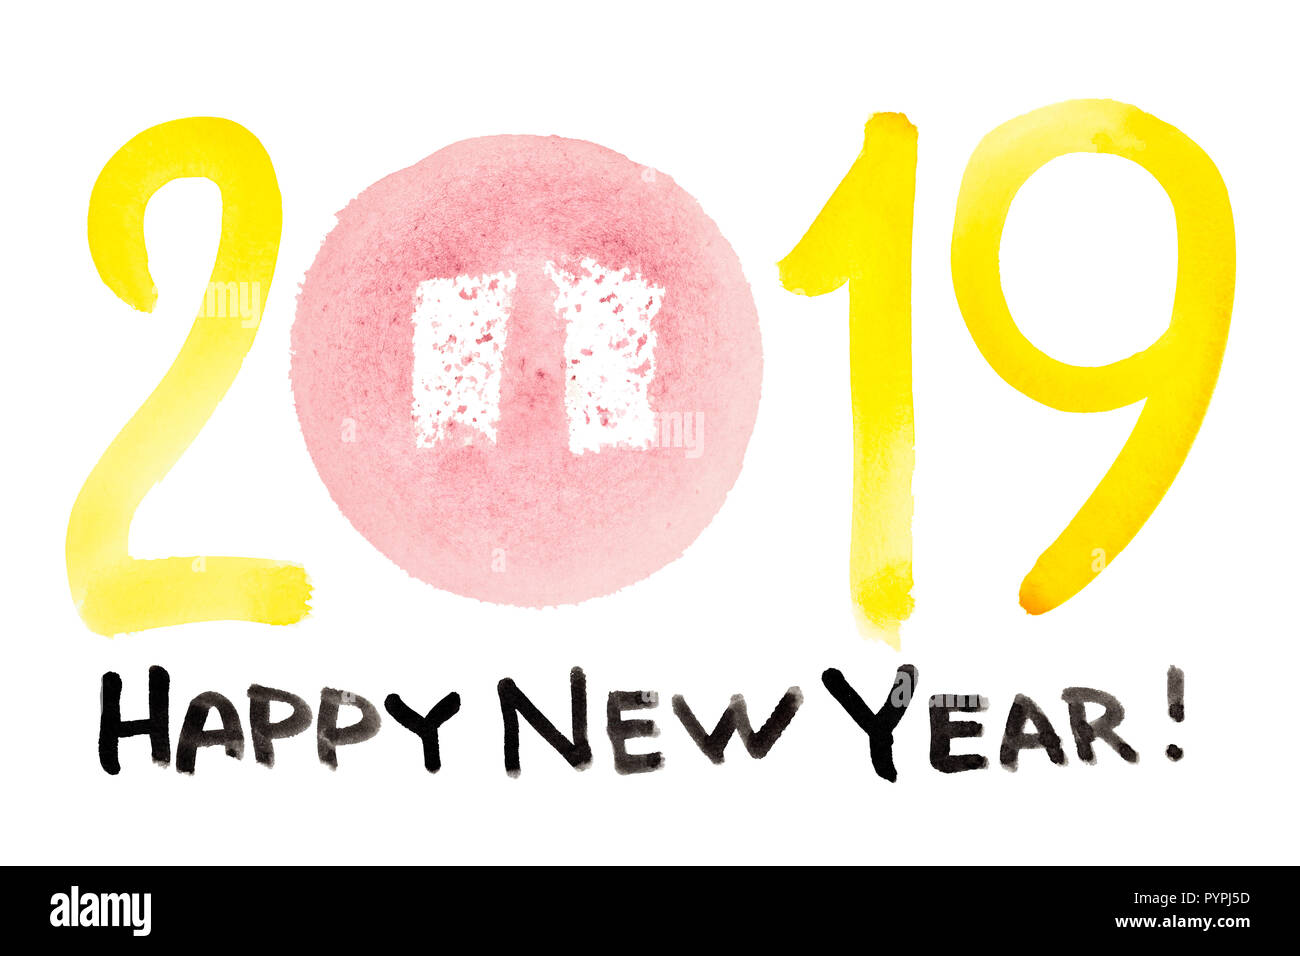 Happy New Year 2019 - Year of The Pig Stock Photo